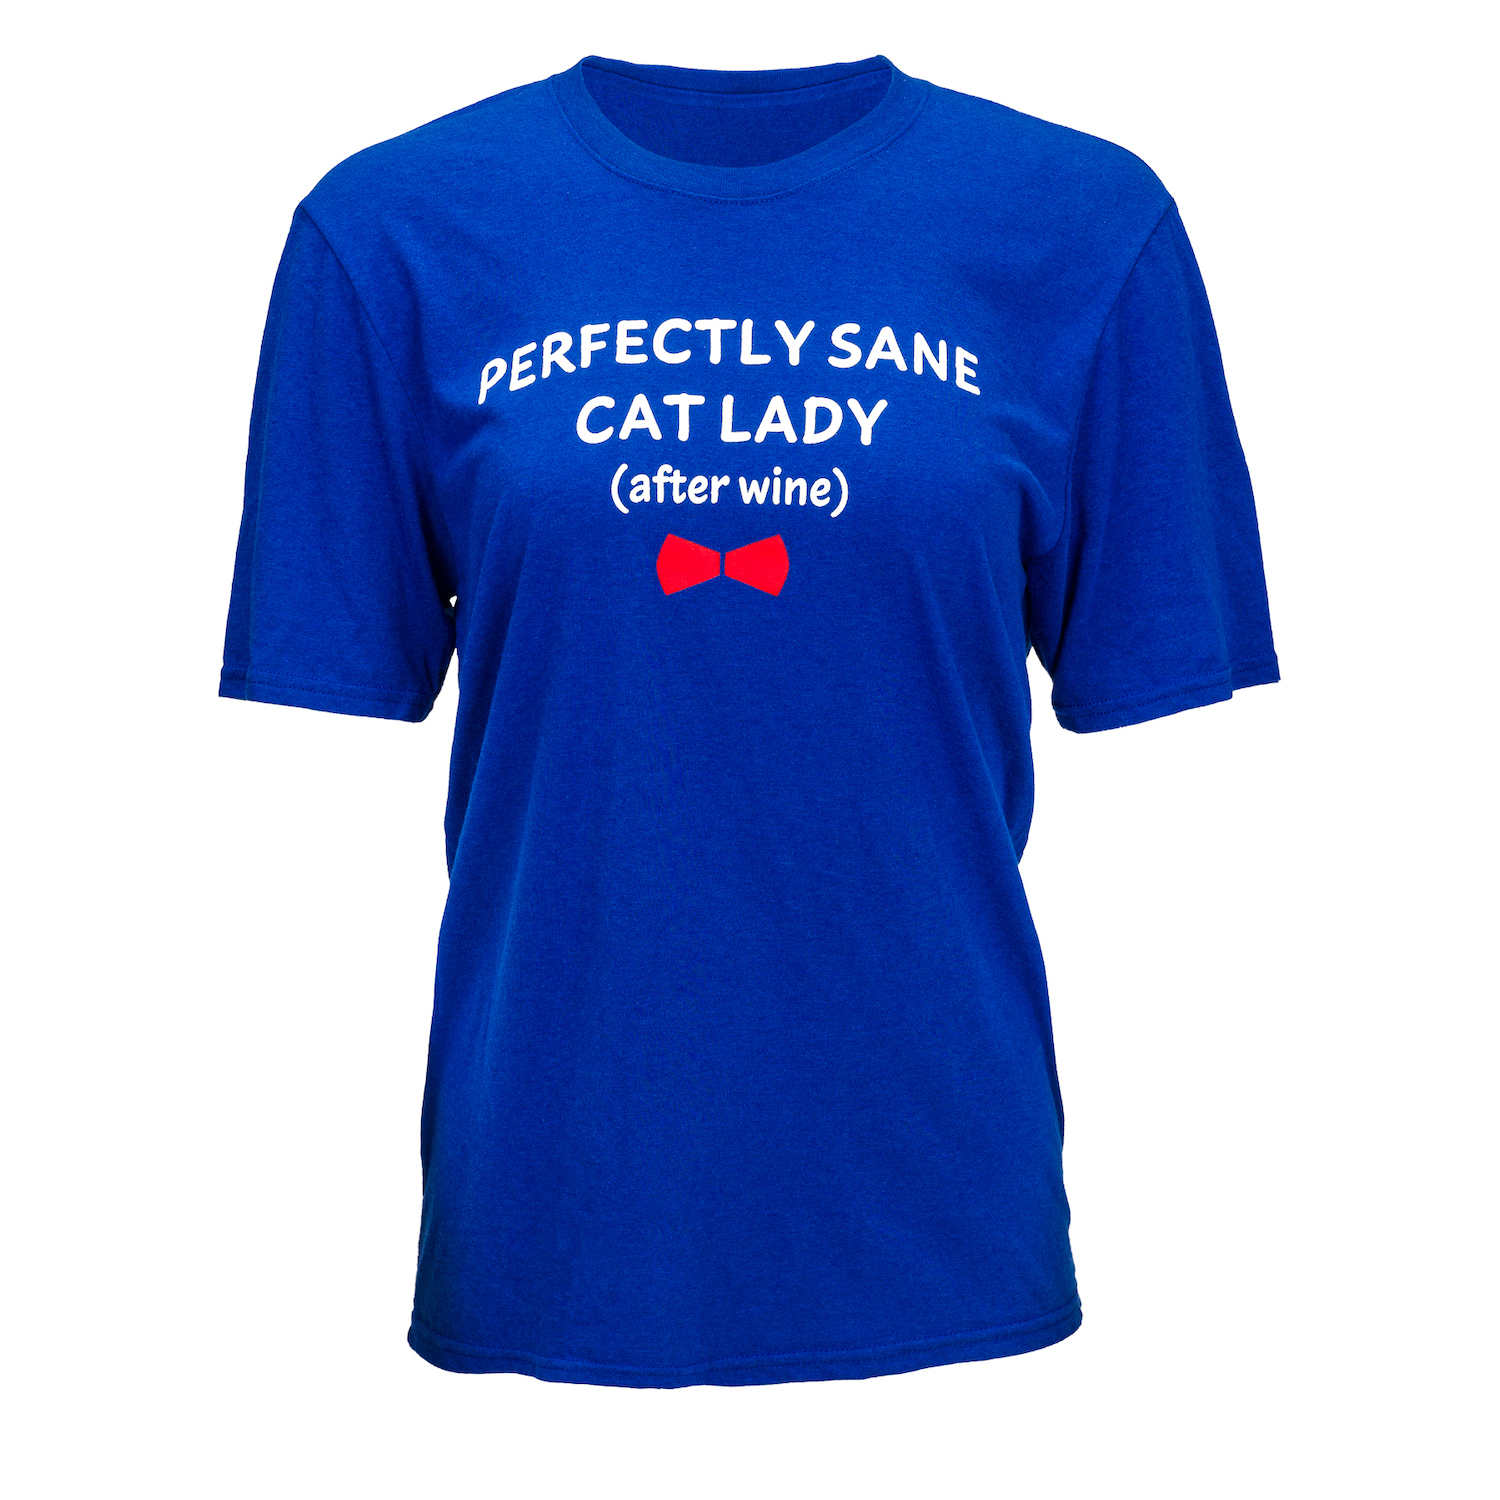 Beau Tyler - Perfectly sane cat lady after wine shirt front